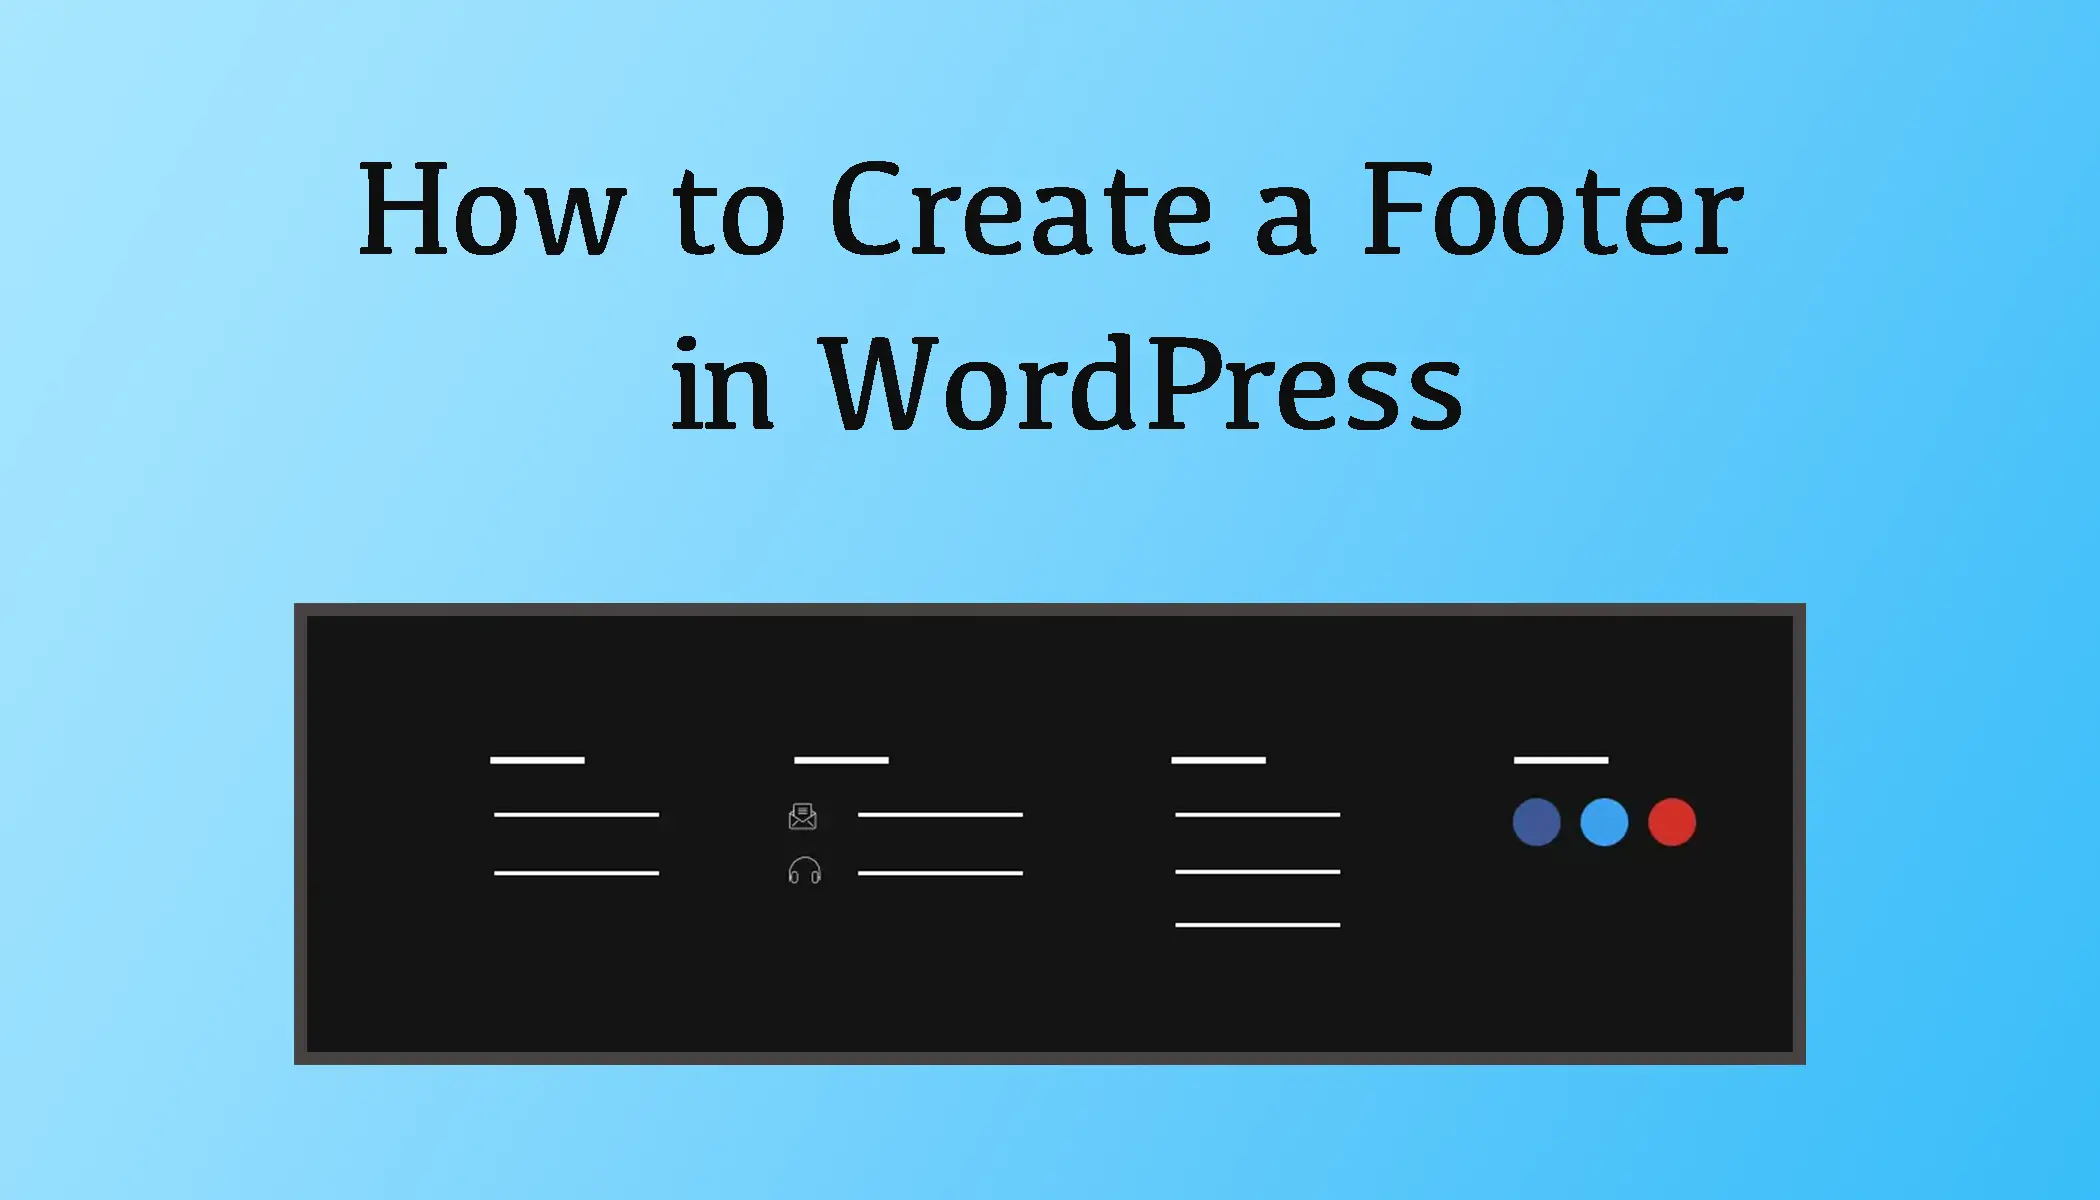 How to Create a Footer in WordPress